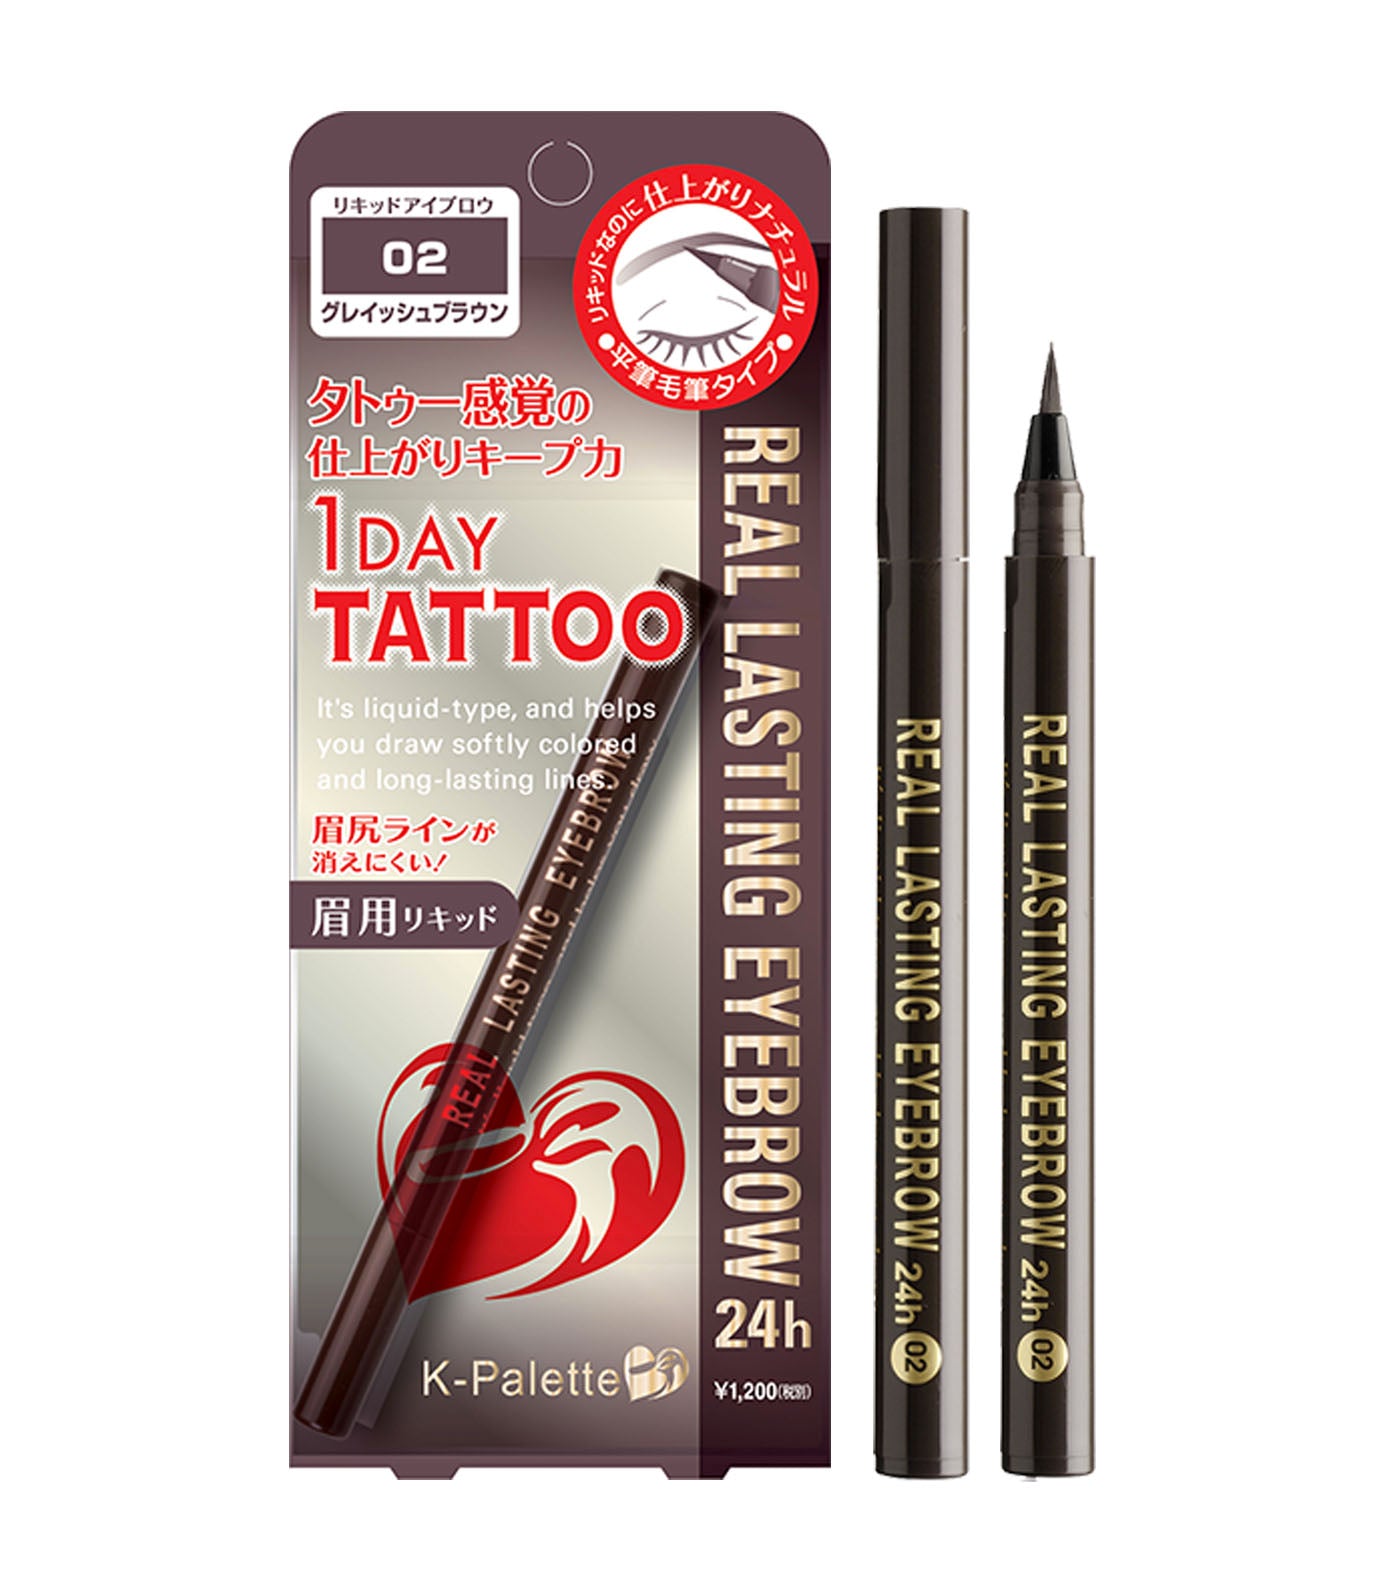 k-palette grayish brown 1 day tattoo real lasting eyebrow liner 24h